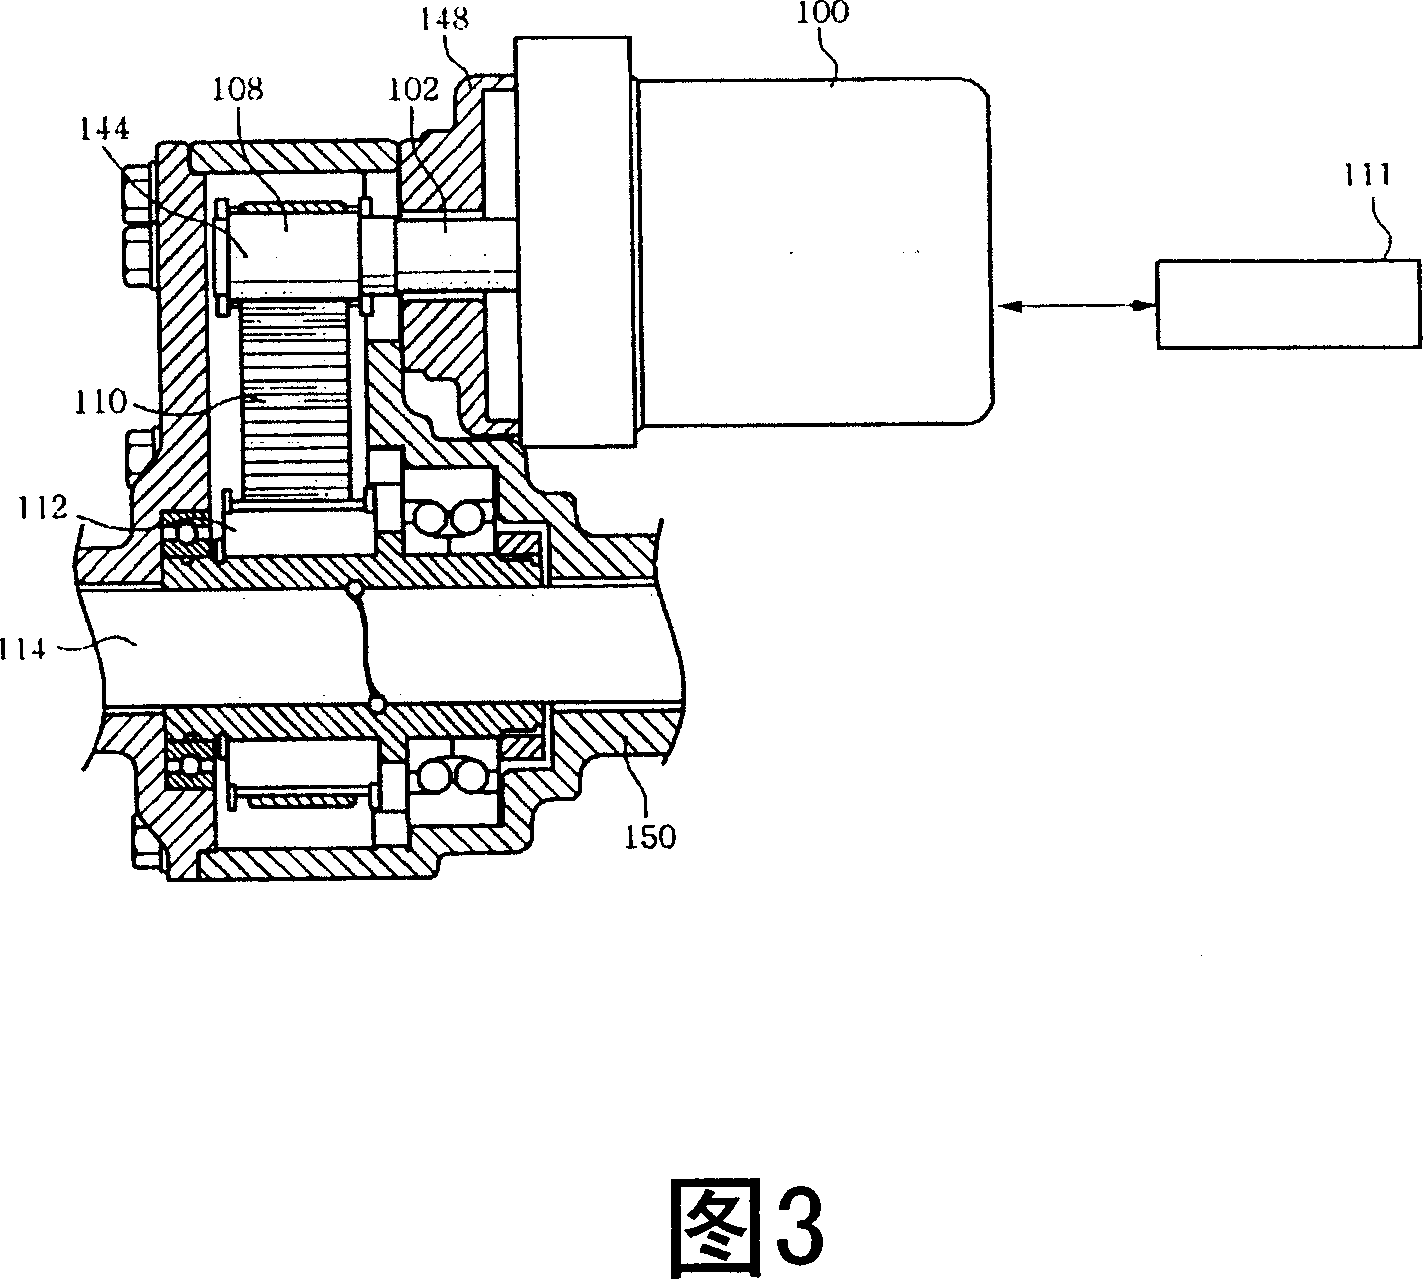 Motor-driven power steering system for a vehicle with a device for adjusting the tension